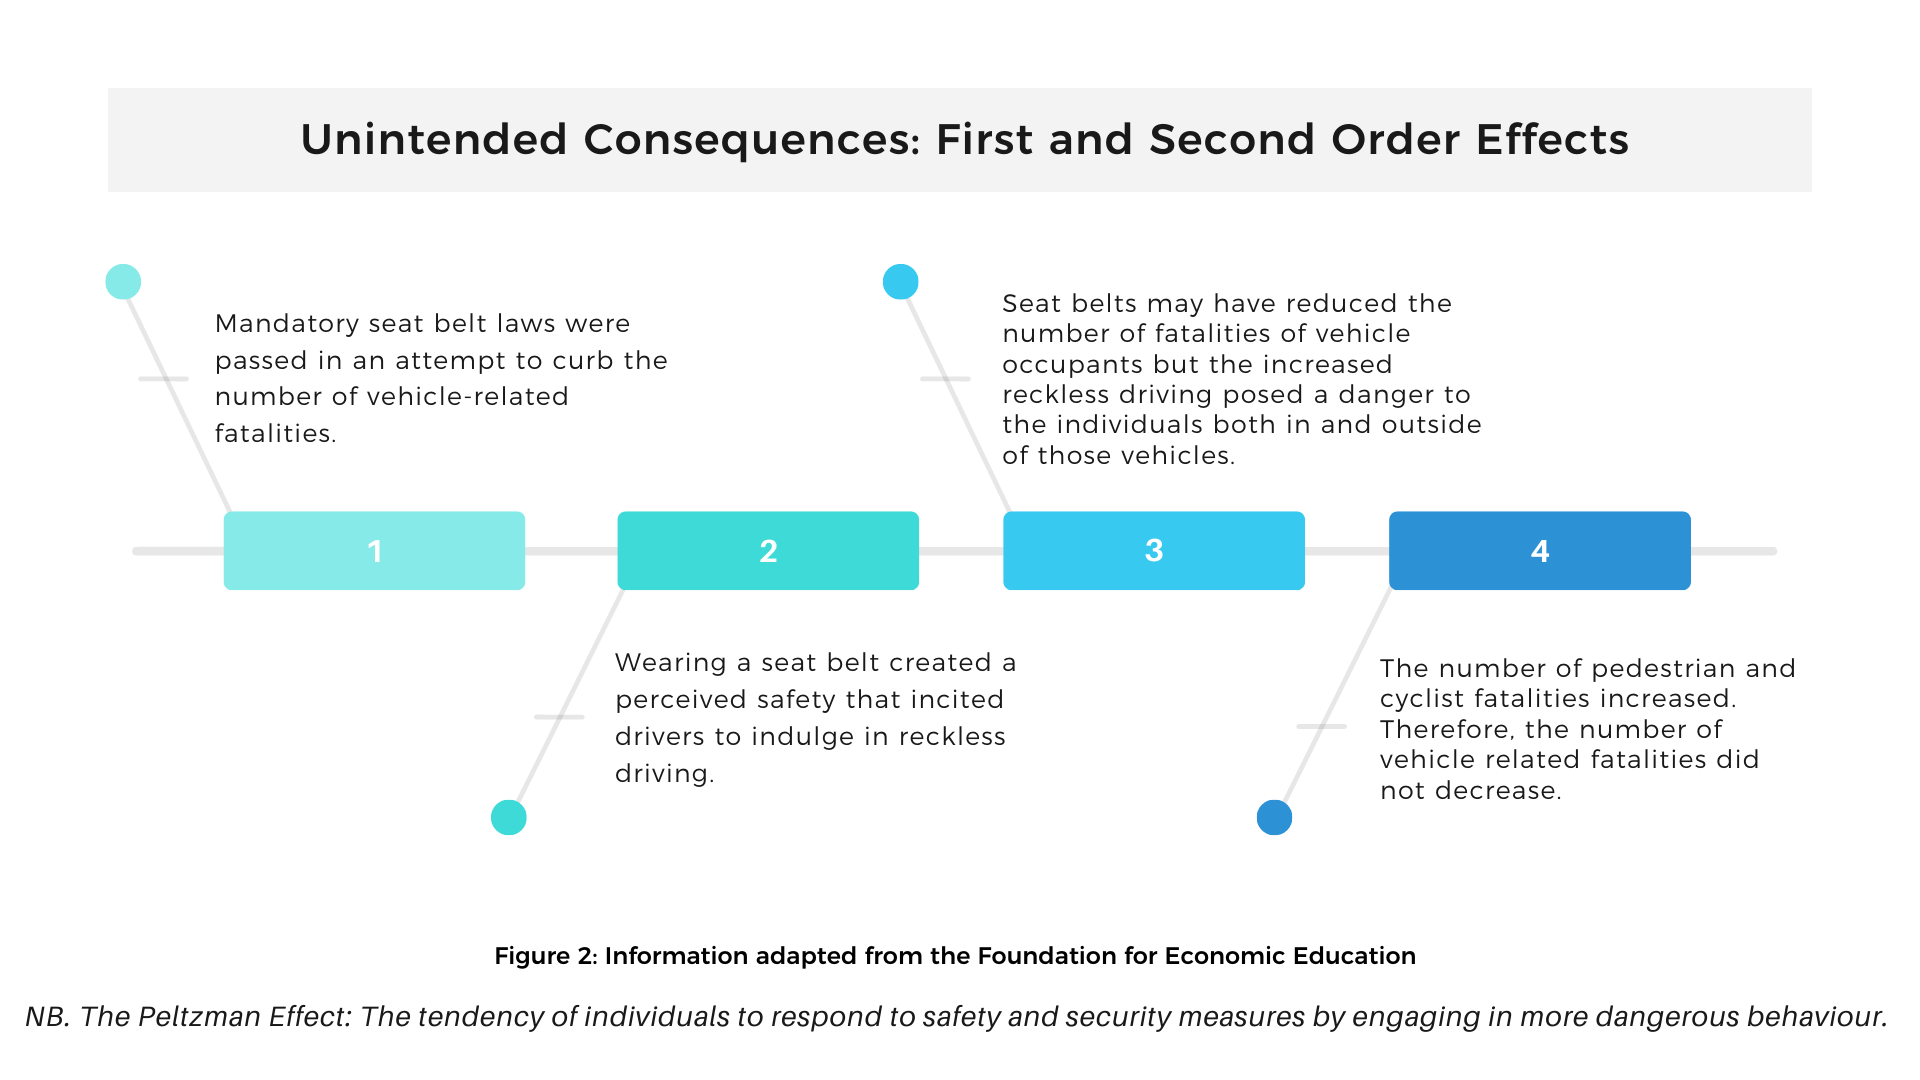 Figure 2: Unintended consequences first and second order 